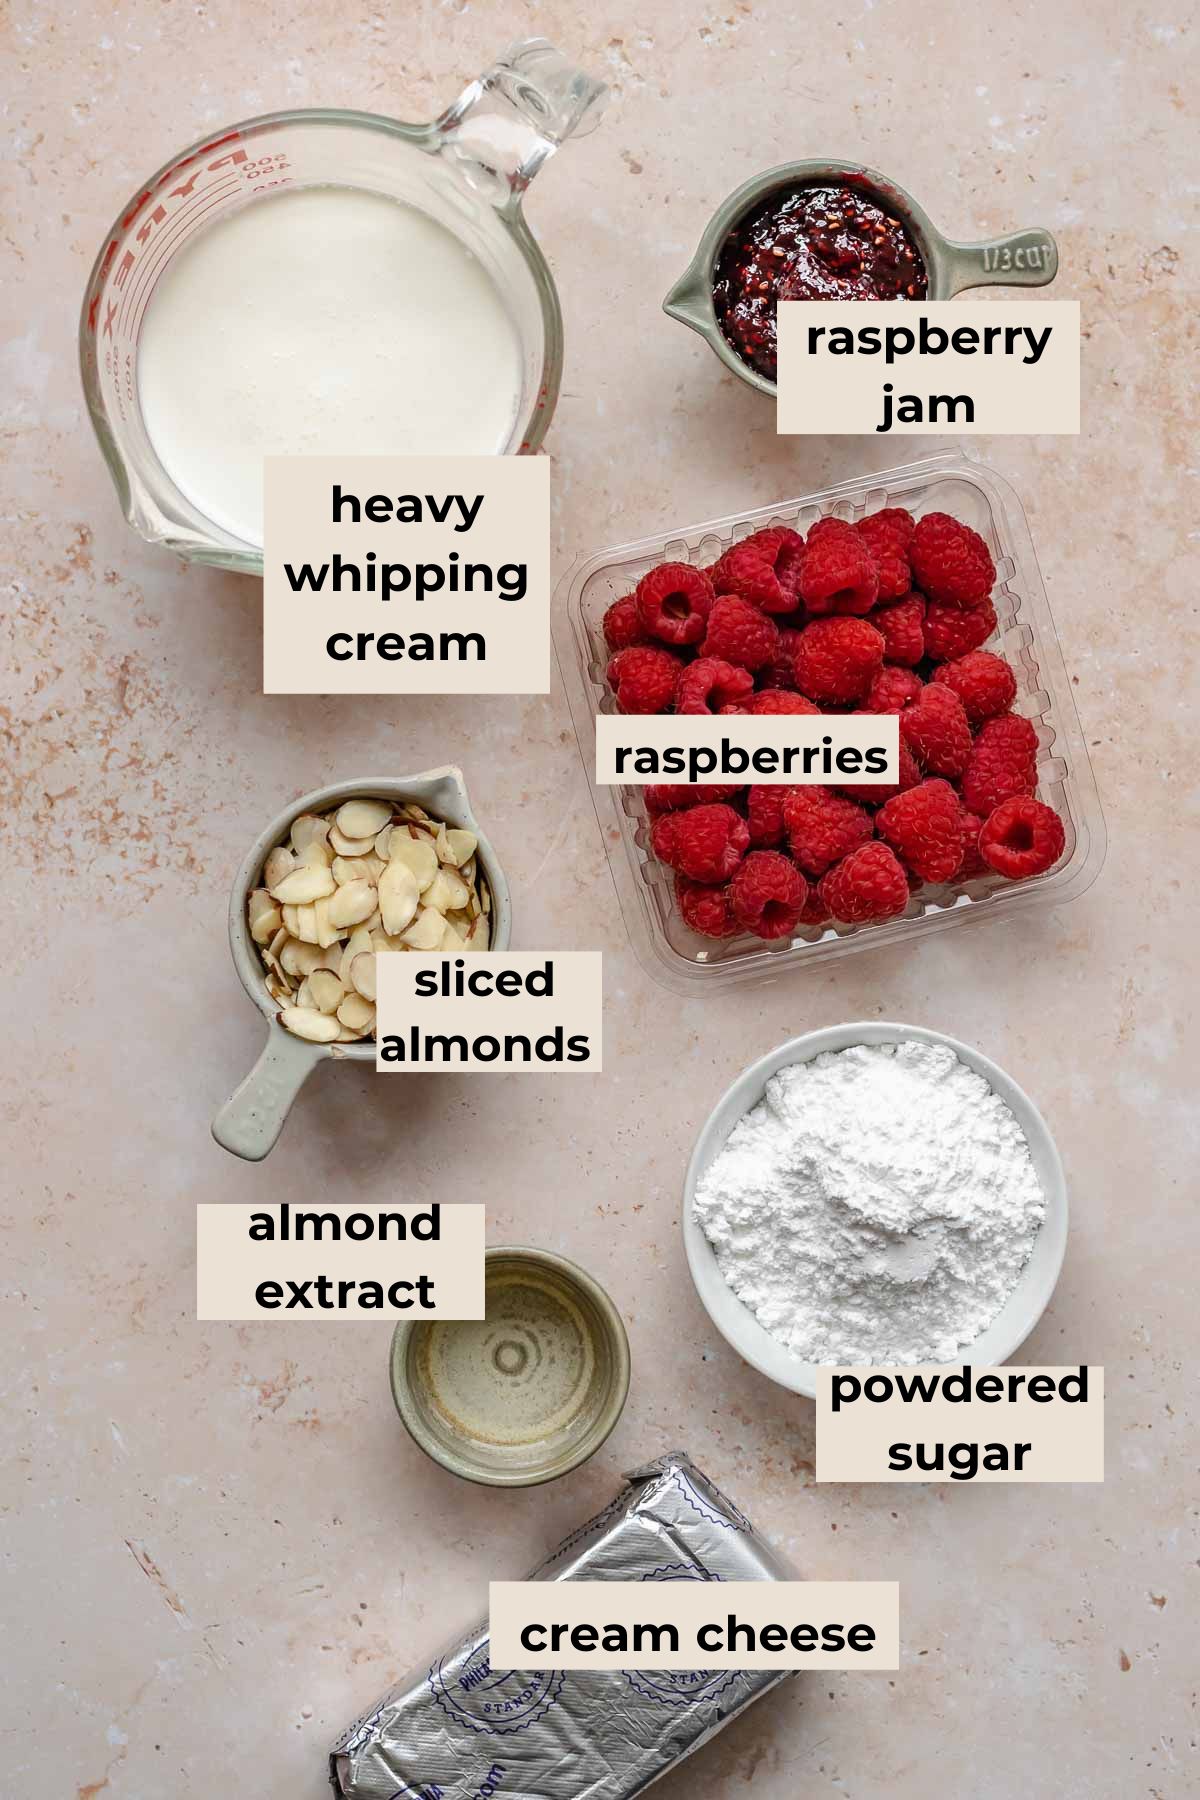 Ingredients for raspberry cake and frosting.